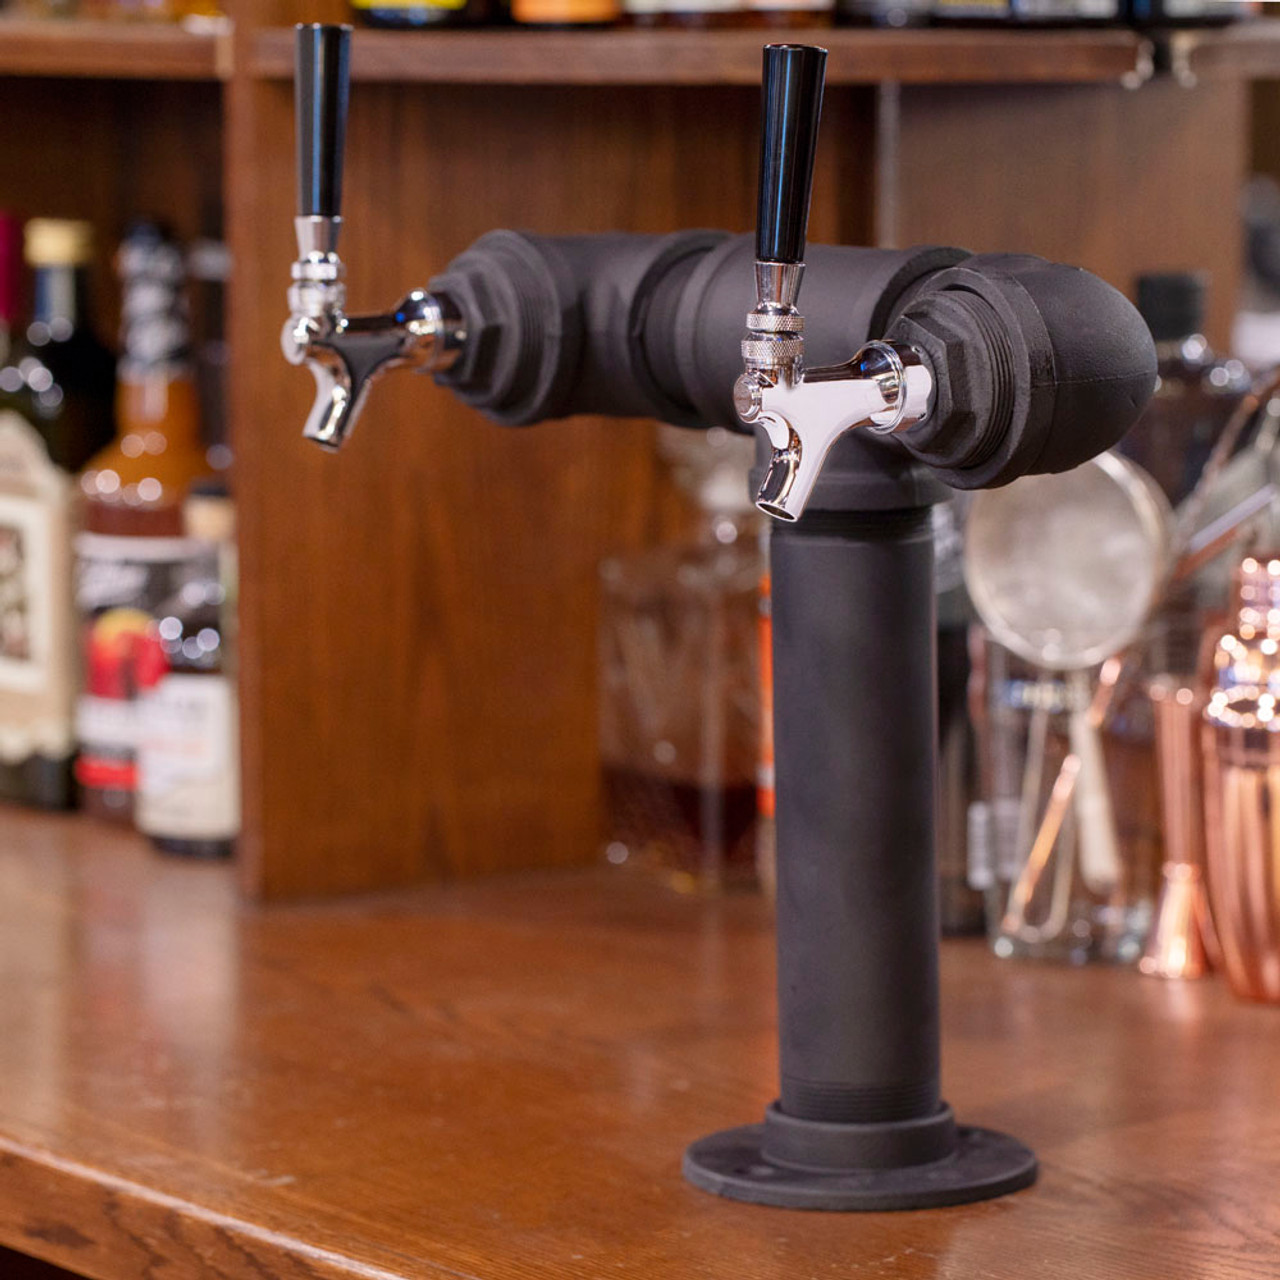 Draft Beer Tower - Black Iron - Double Tap - Standard Stainless Steel Faucet